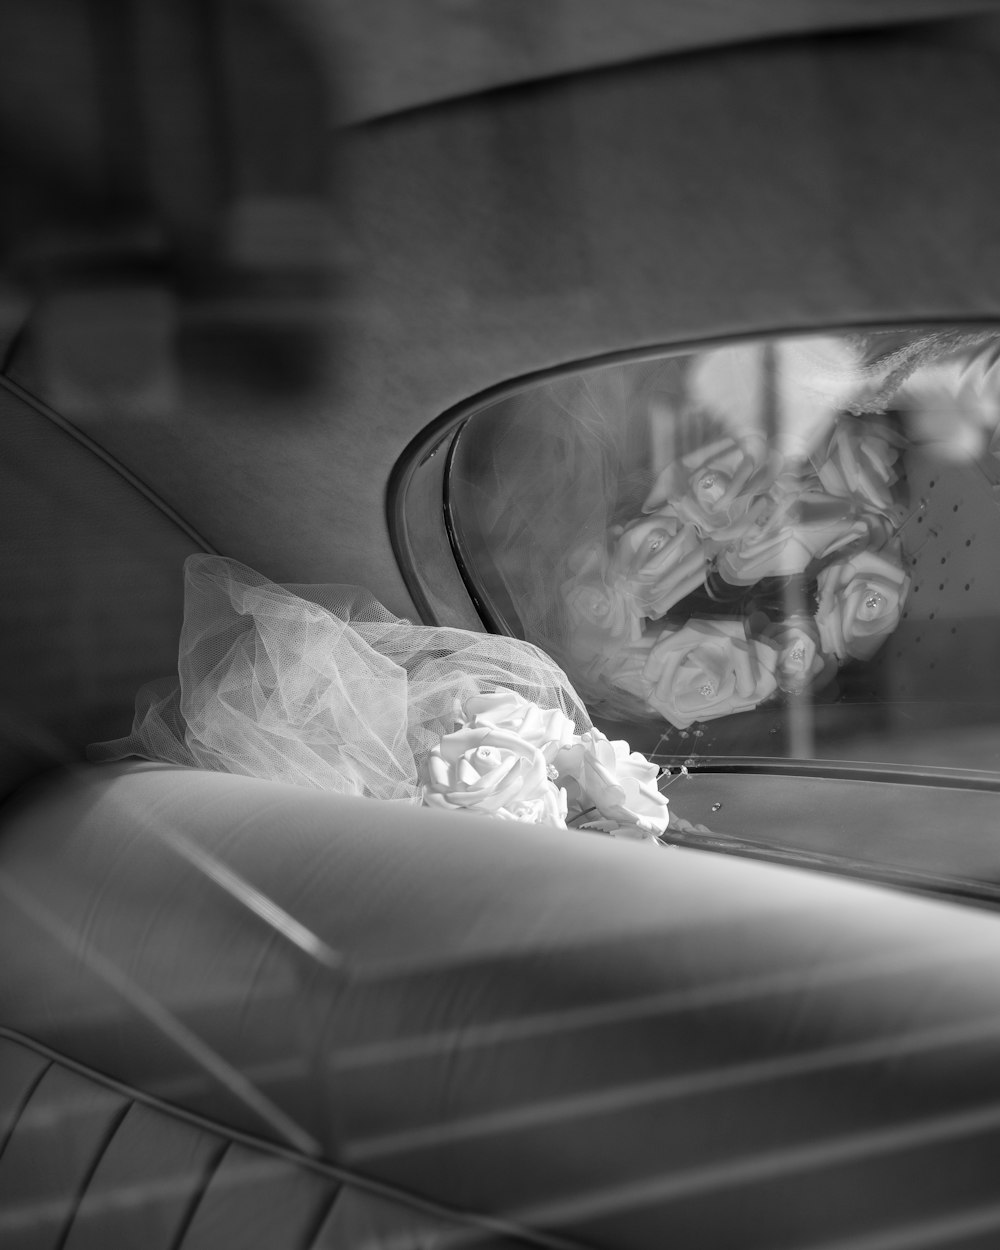 a black and white photo of a car's rear view mirror